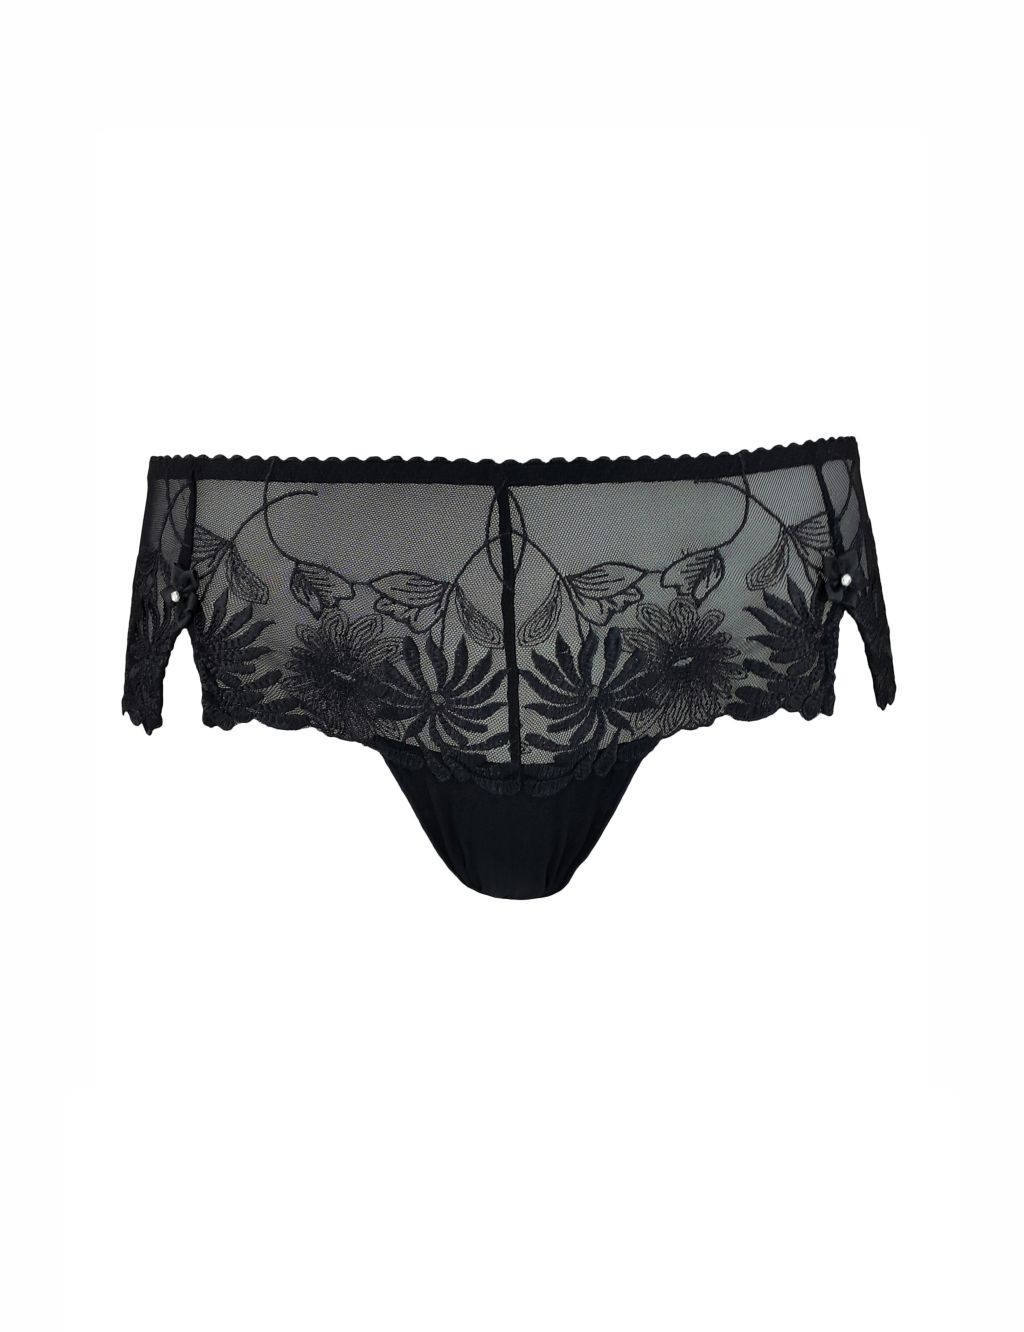 St Tropez French Knickers image 2